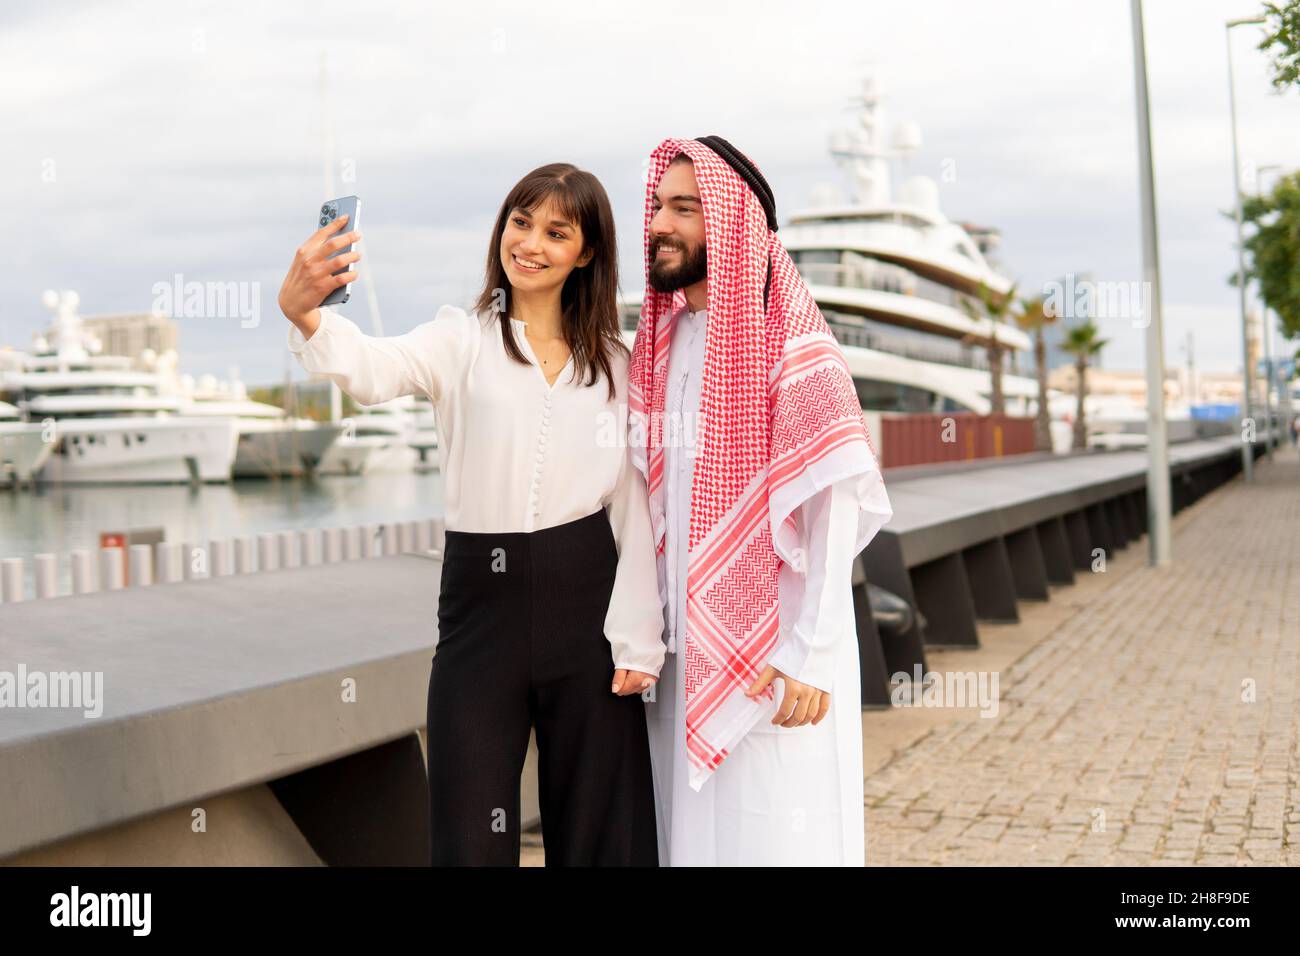 Female manager in formal wear smiling and taking selfie with Arab male client during meeting on embankment Stock Photo